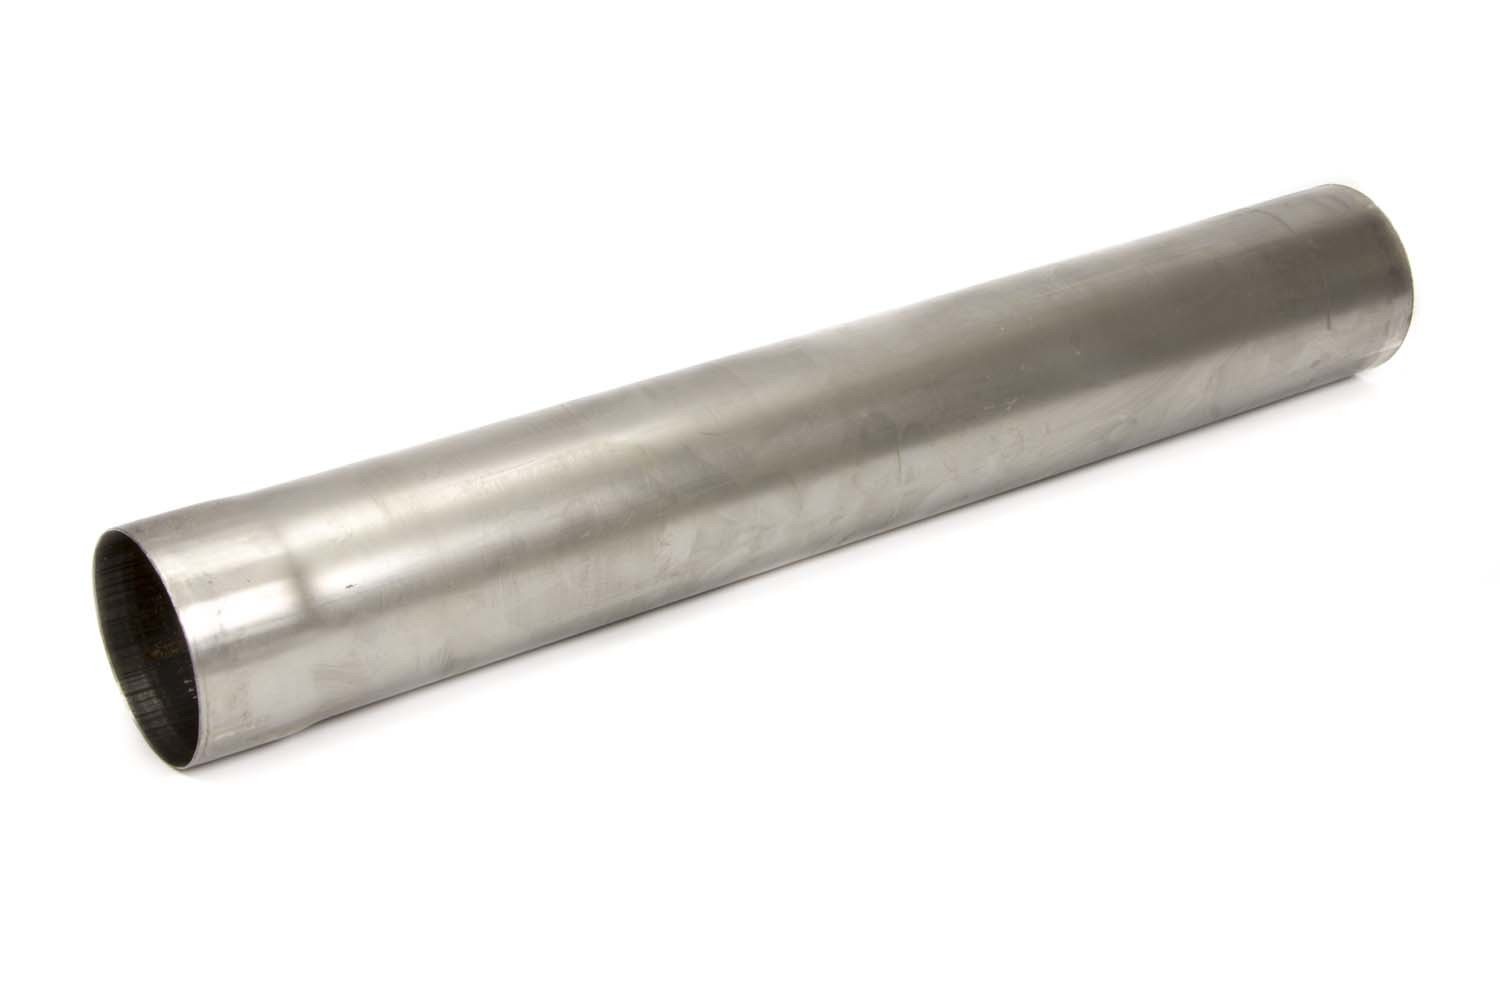 Schoenfeld Headers 240050 Exhaust Pipe Extension, Straight, 5 in Diameter, 2 ft Long, 1 End Expanded, Steel, Natural, Each